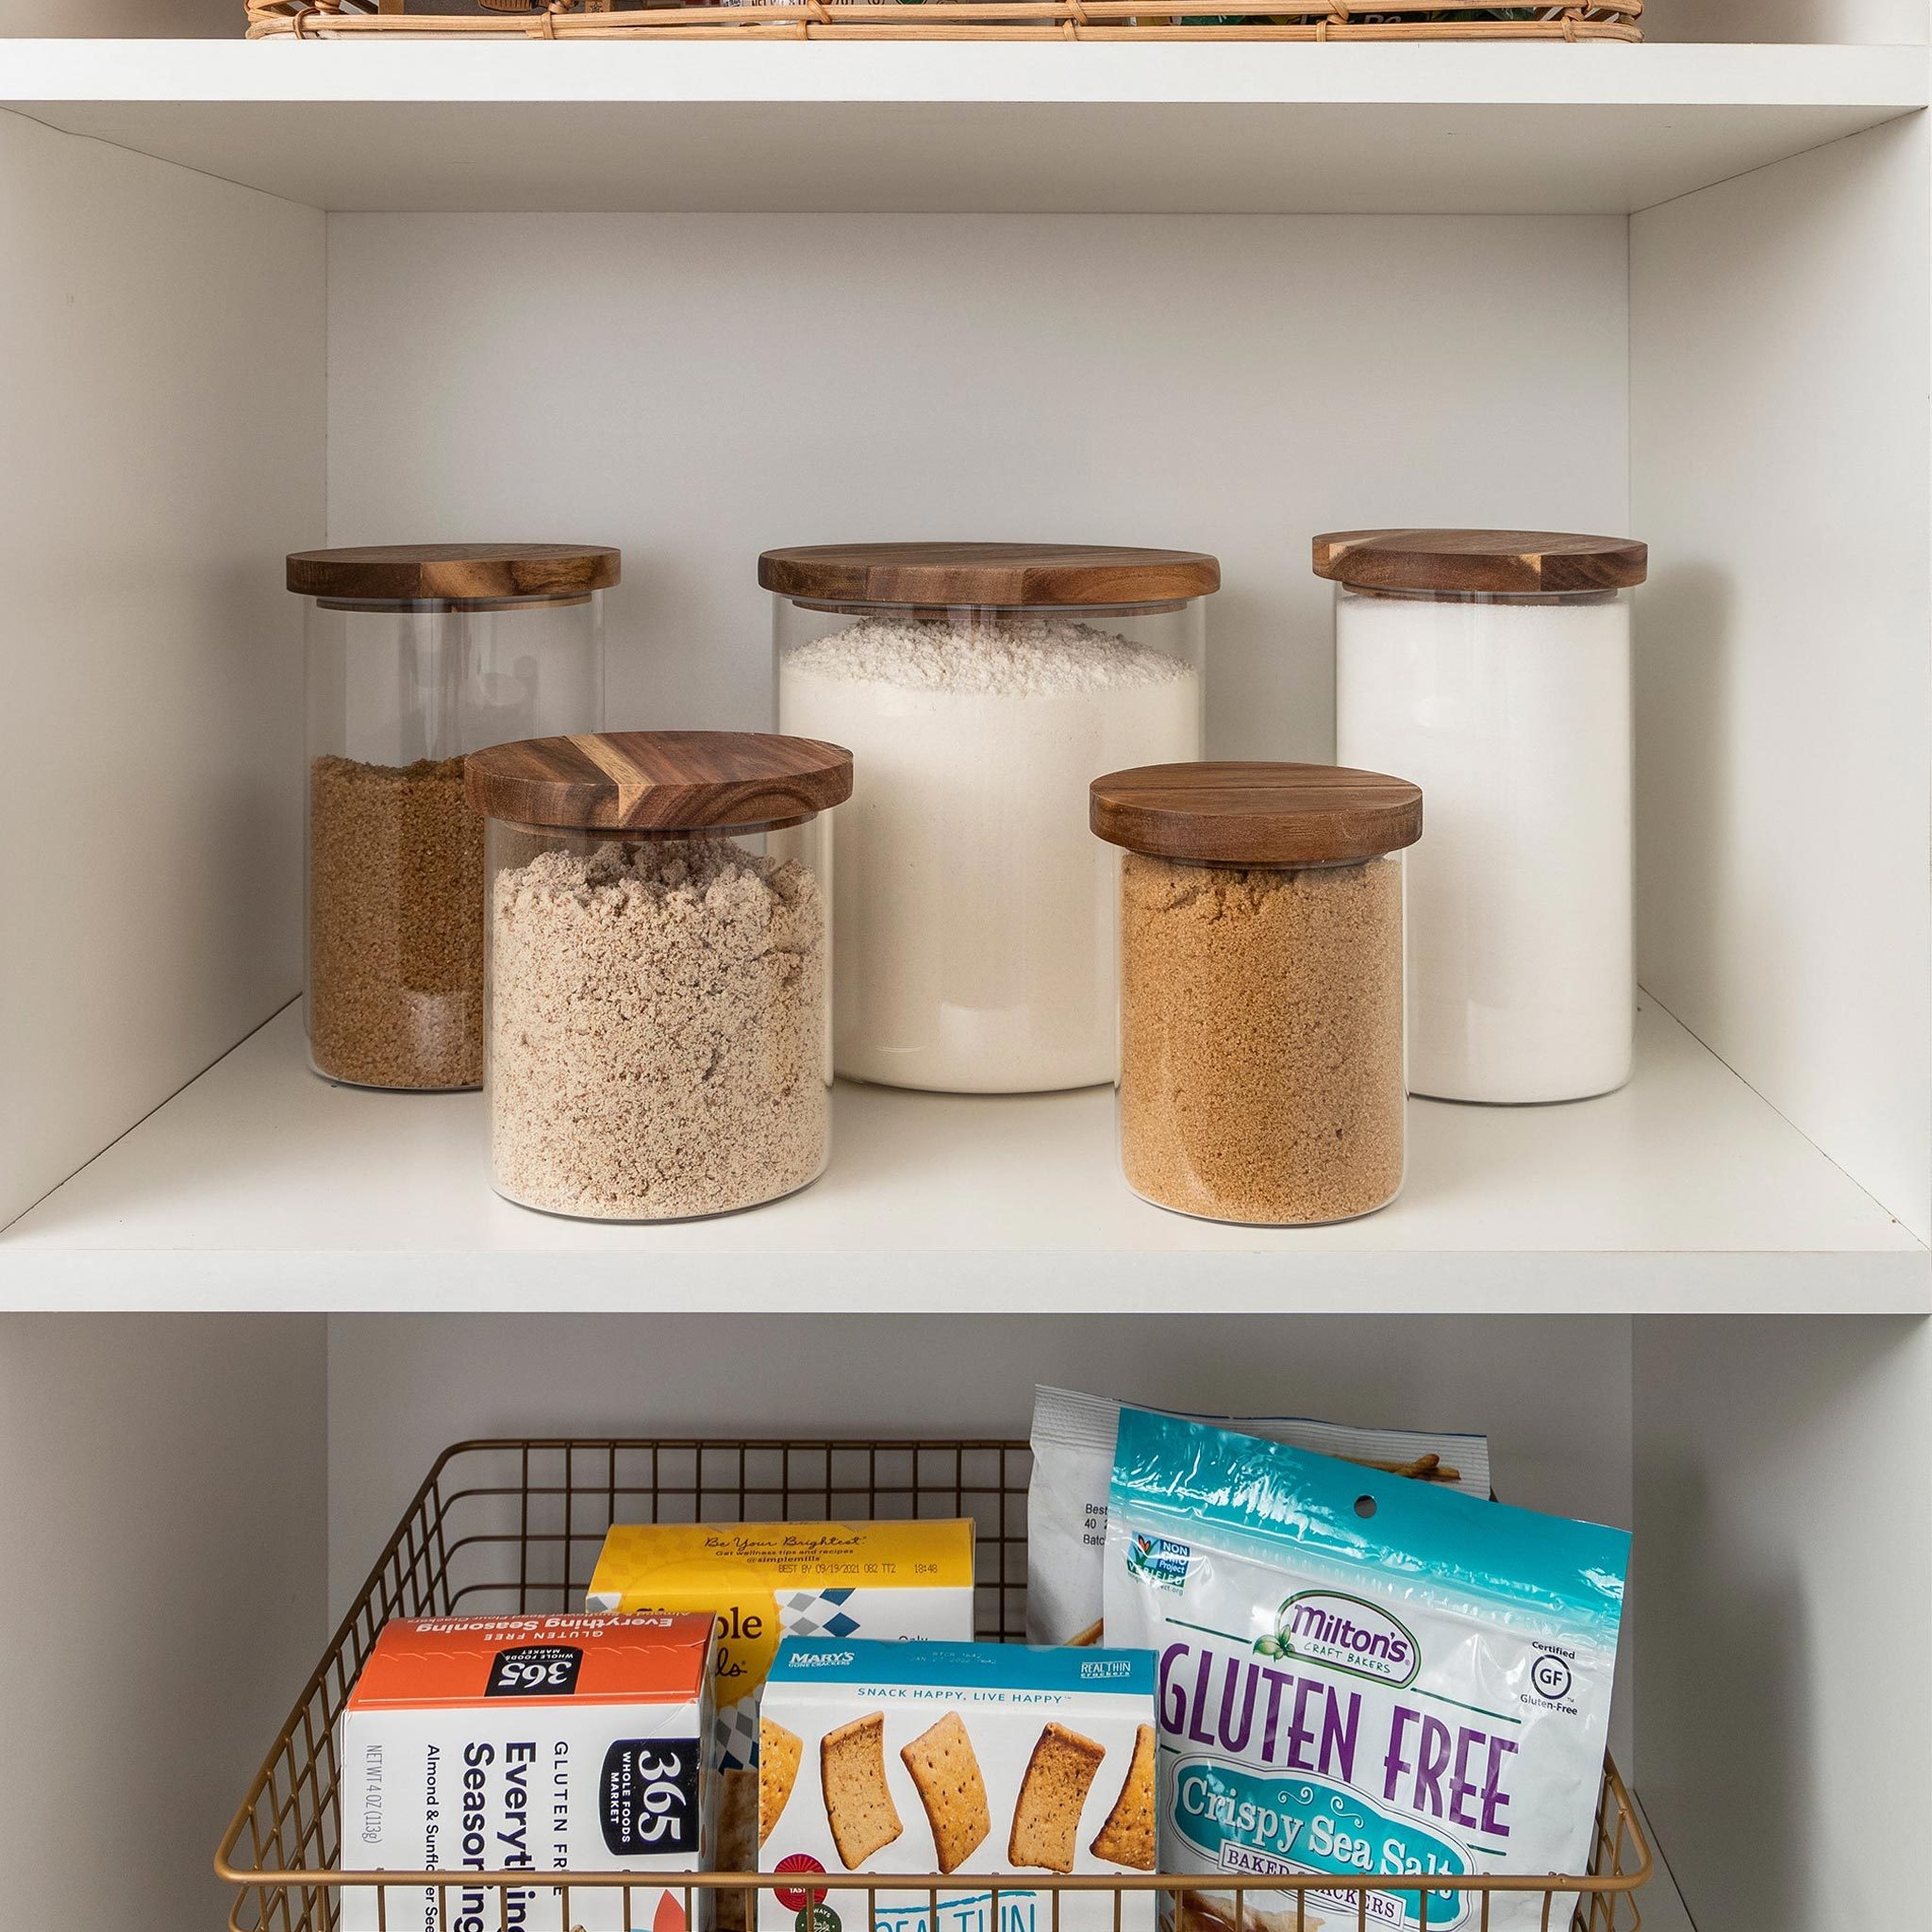 8 Best Pantry Organization Bins of 2023: Clear, Cheap and More Options